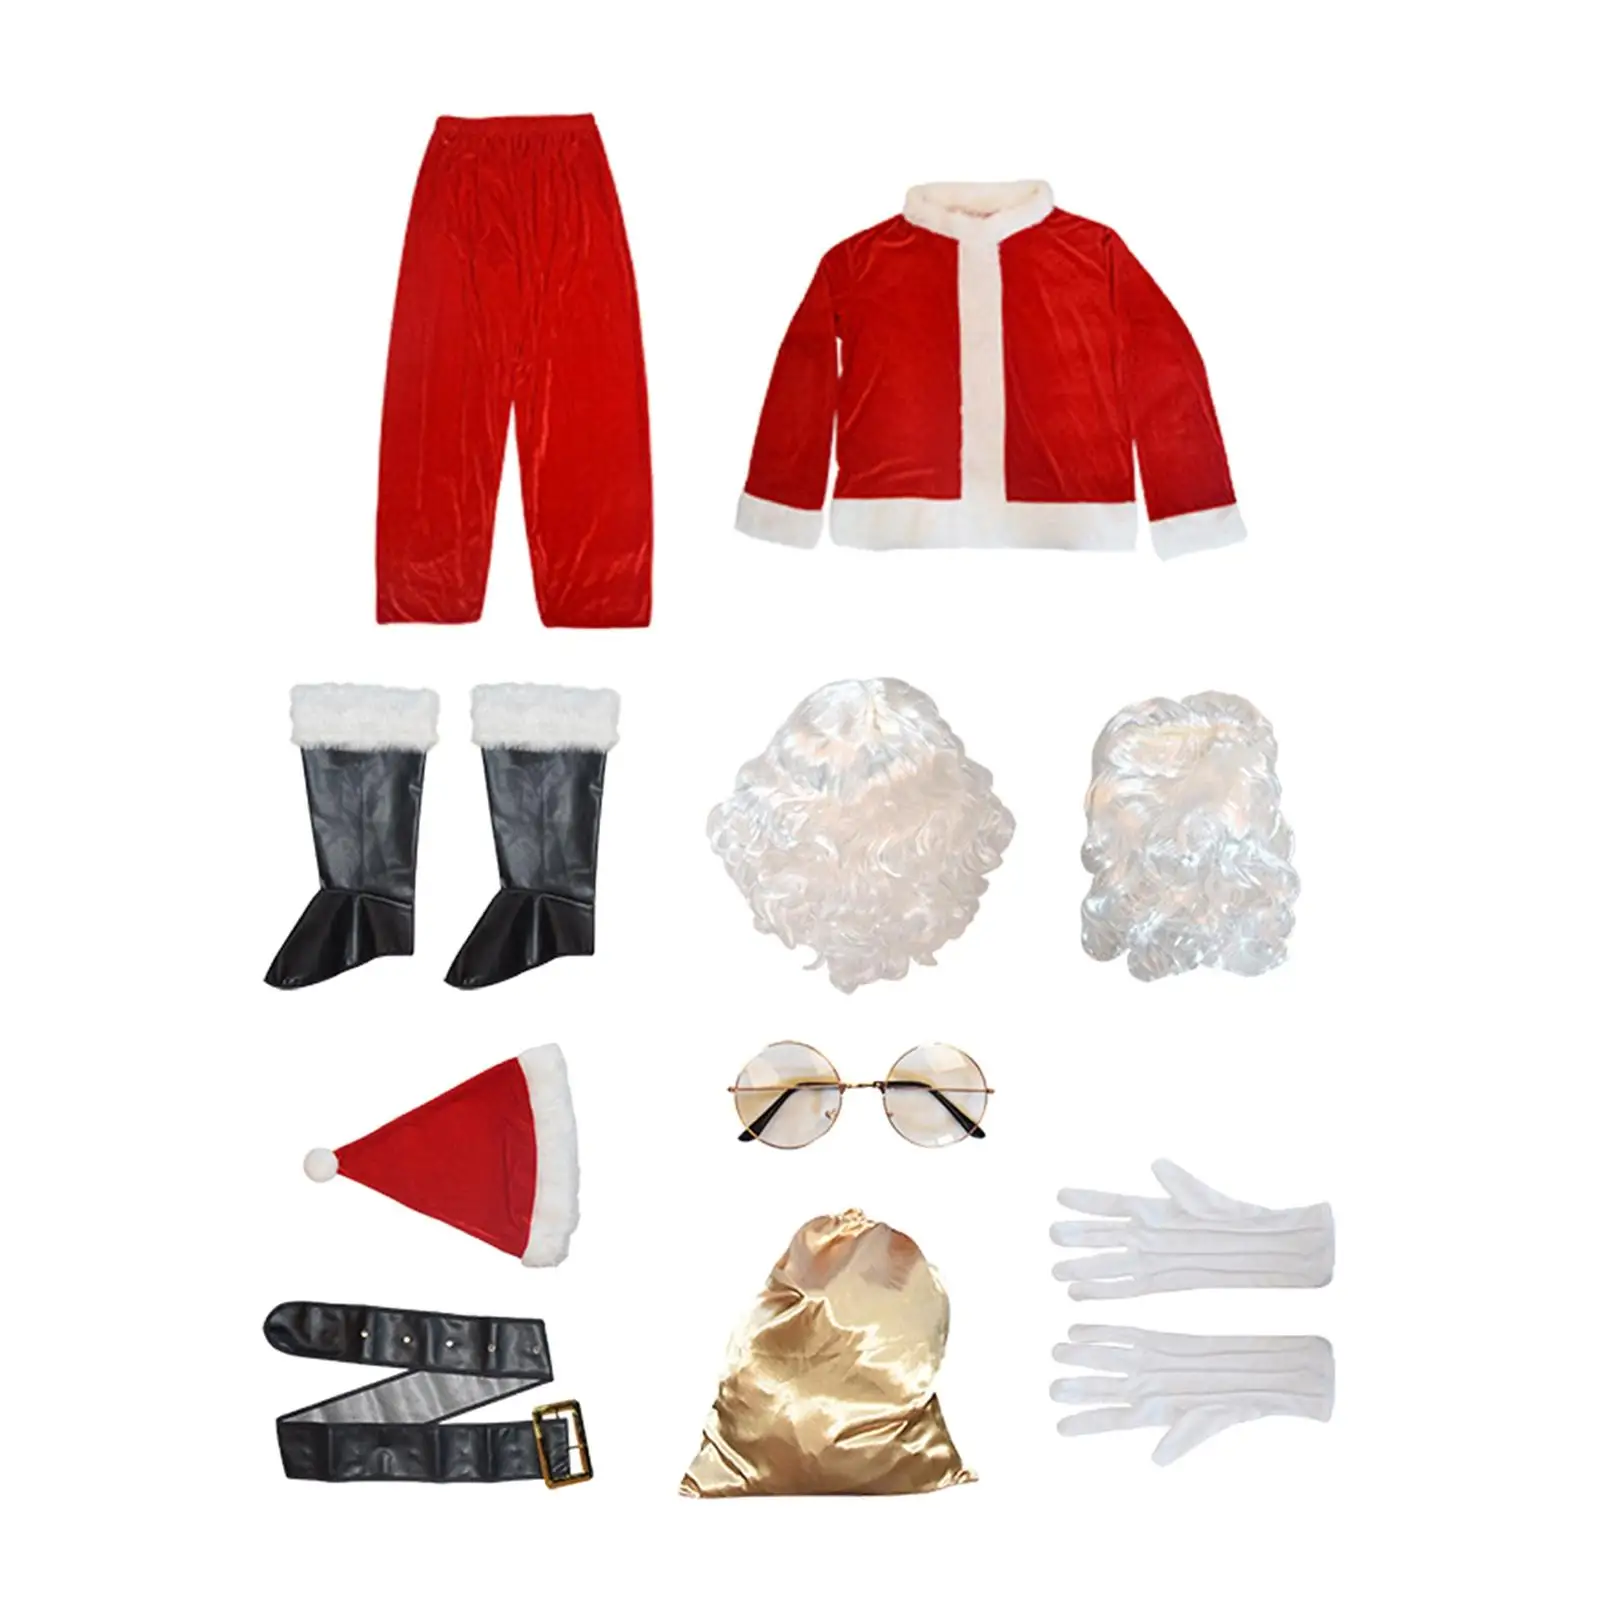 10Pcs Santa Claus Costume Wig Glasses Xmas suits Set Christmas Clause Outfit for Holidays Xmas Clothing Accessory Carnival Party